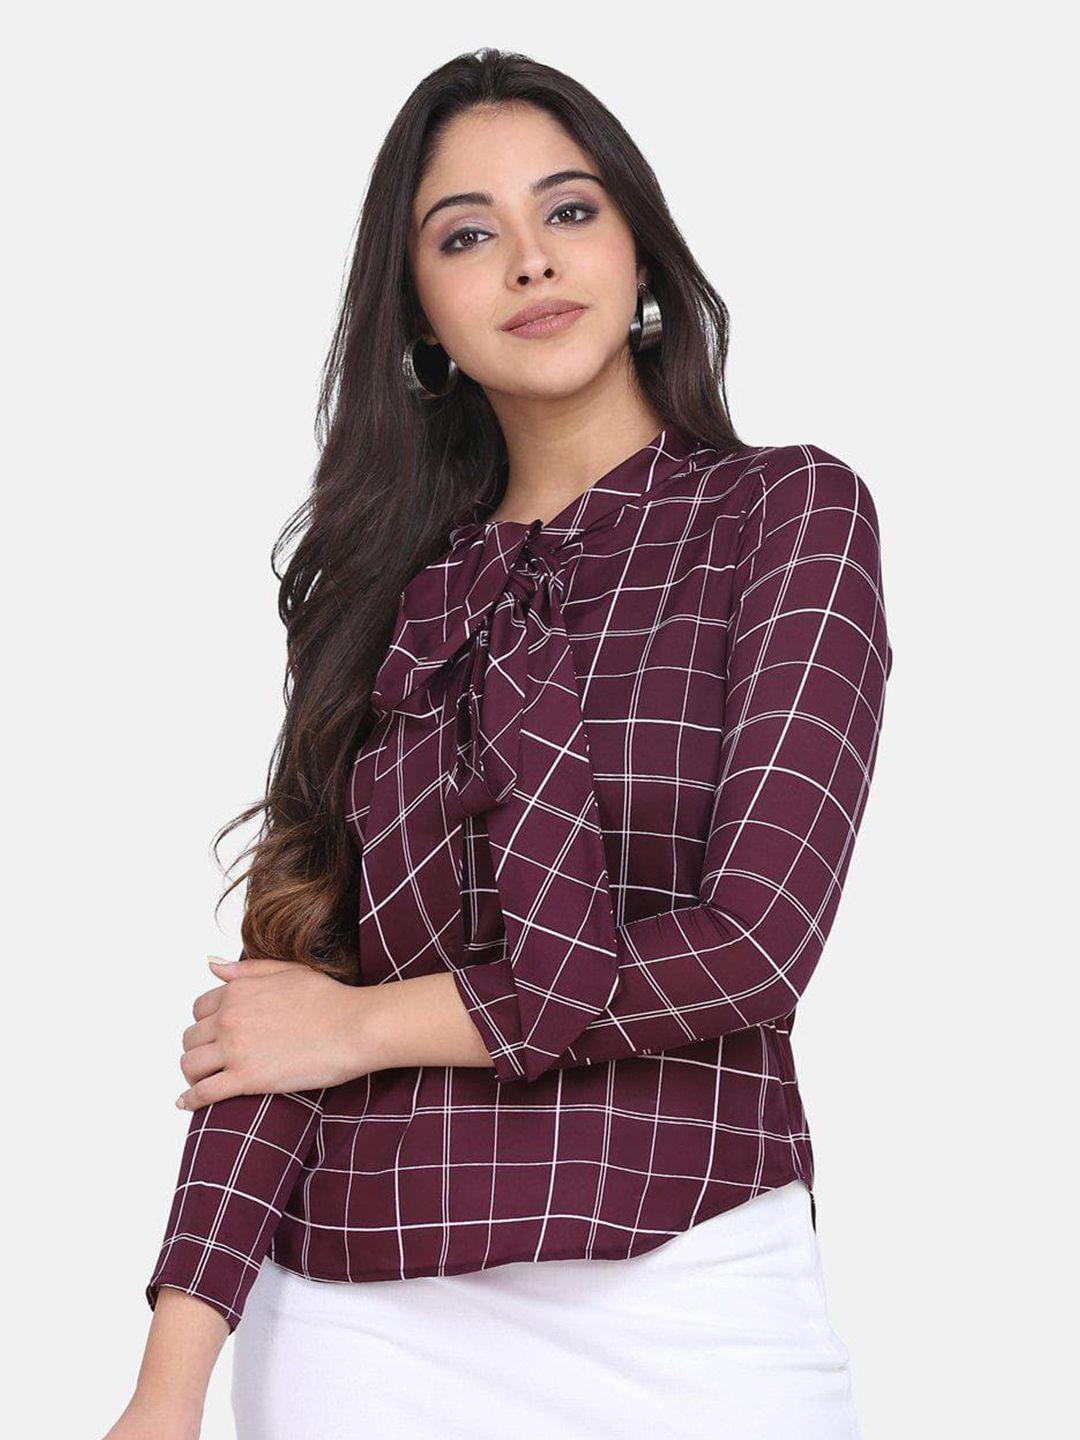 powersutra women maroon & white checked tie-up neck crepe shirt style top